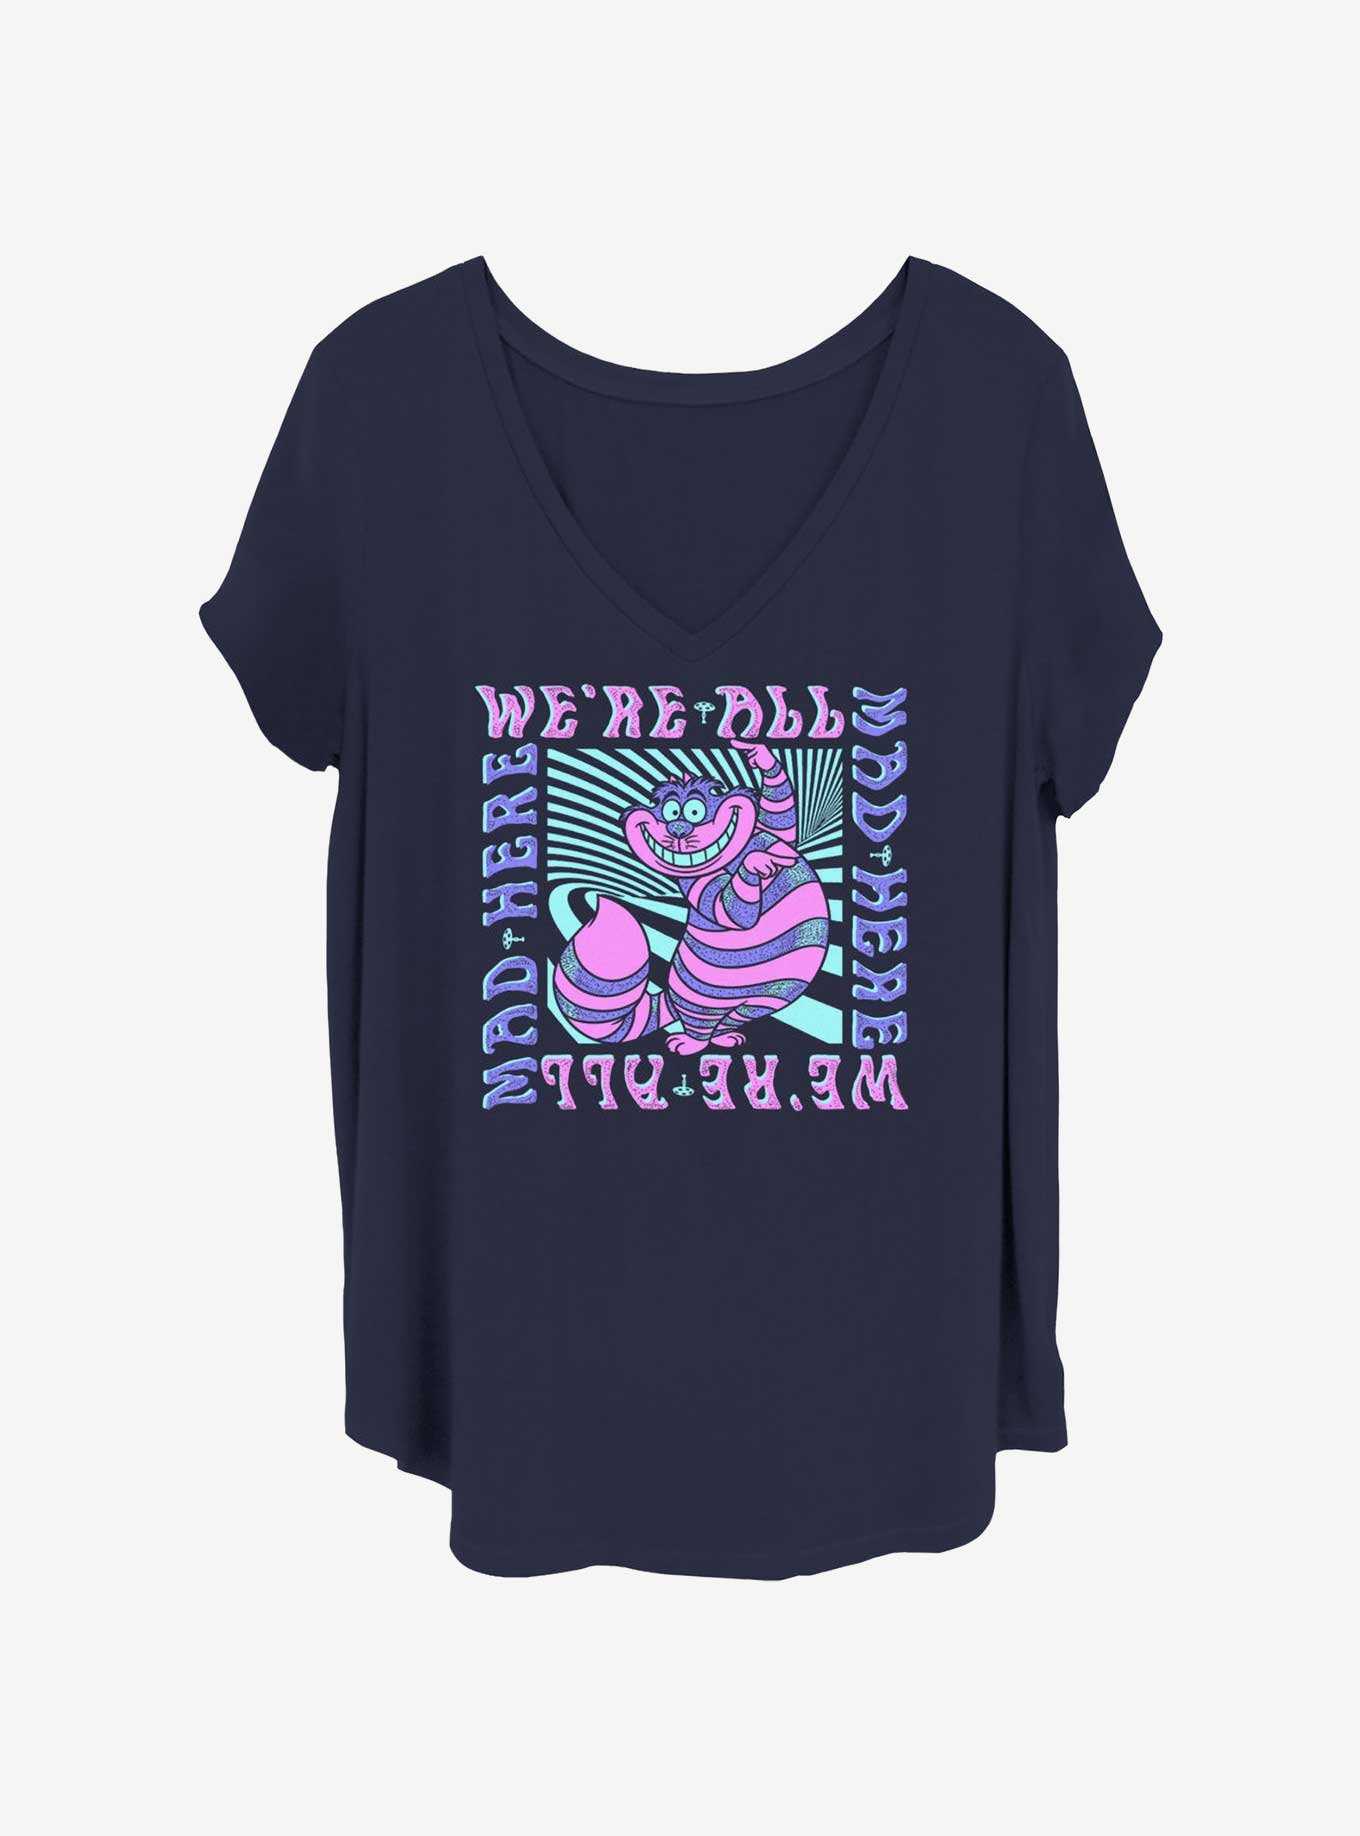 Disney Alice In Wonderland Cheshire We're All Mad Here Girls T-Shirt Plus Size, , hi-res